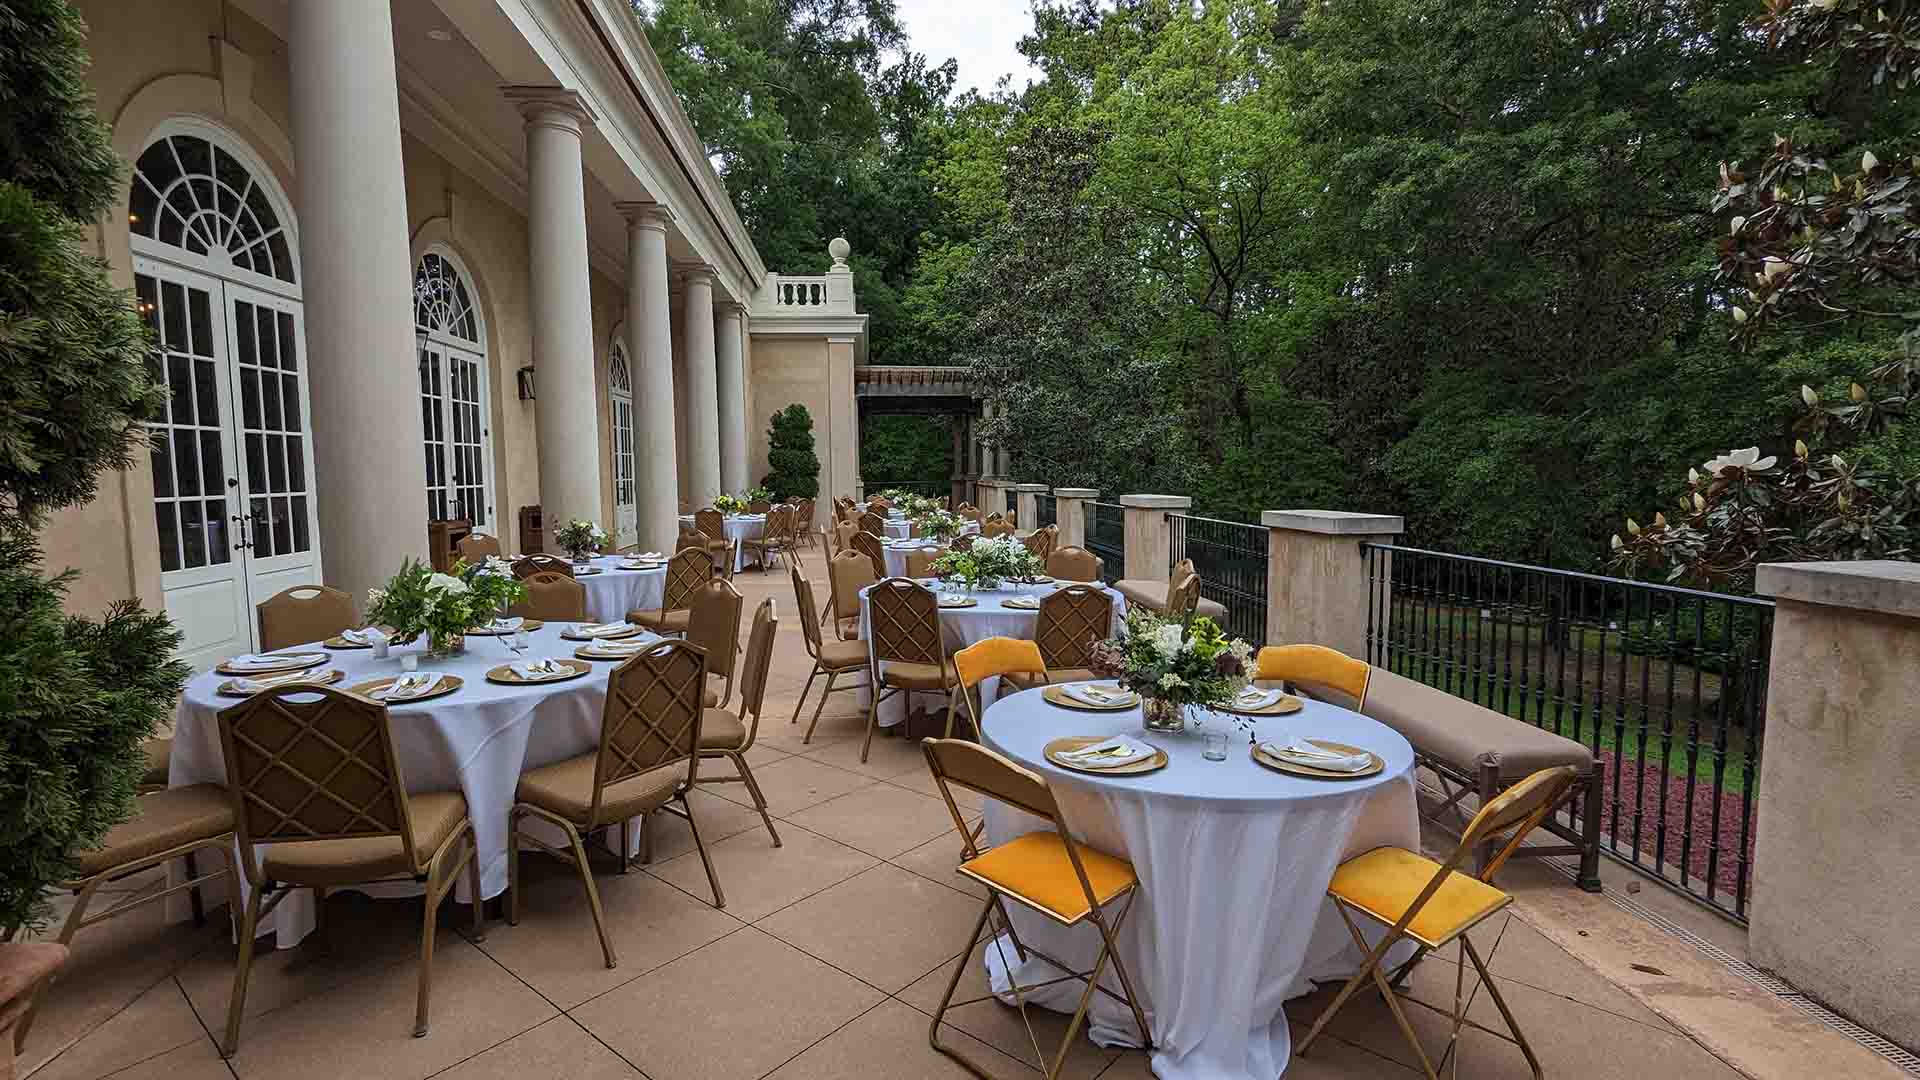 Tables and chairs arranged for an event on the terrace of the Hills & Dales Estate visitor center.